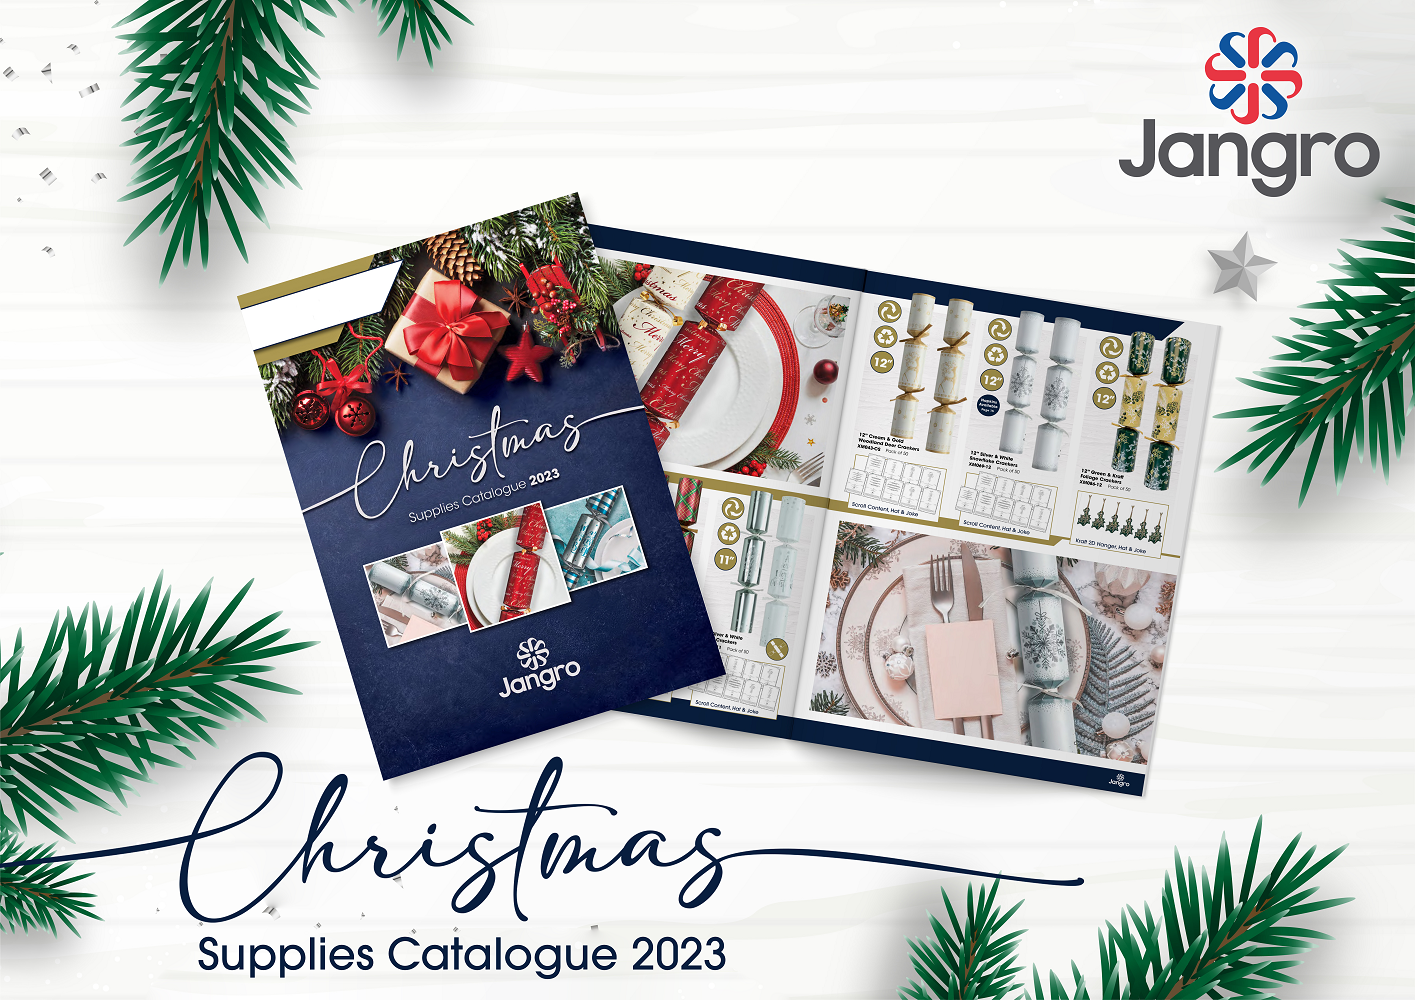 CHRISTMAS PLANNING MADE EASY WITH JANGRO